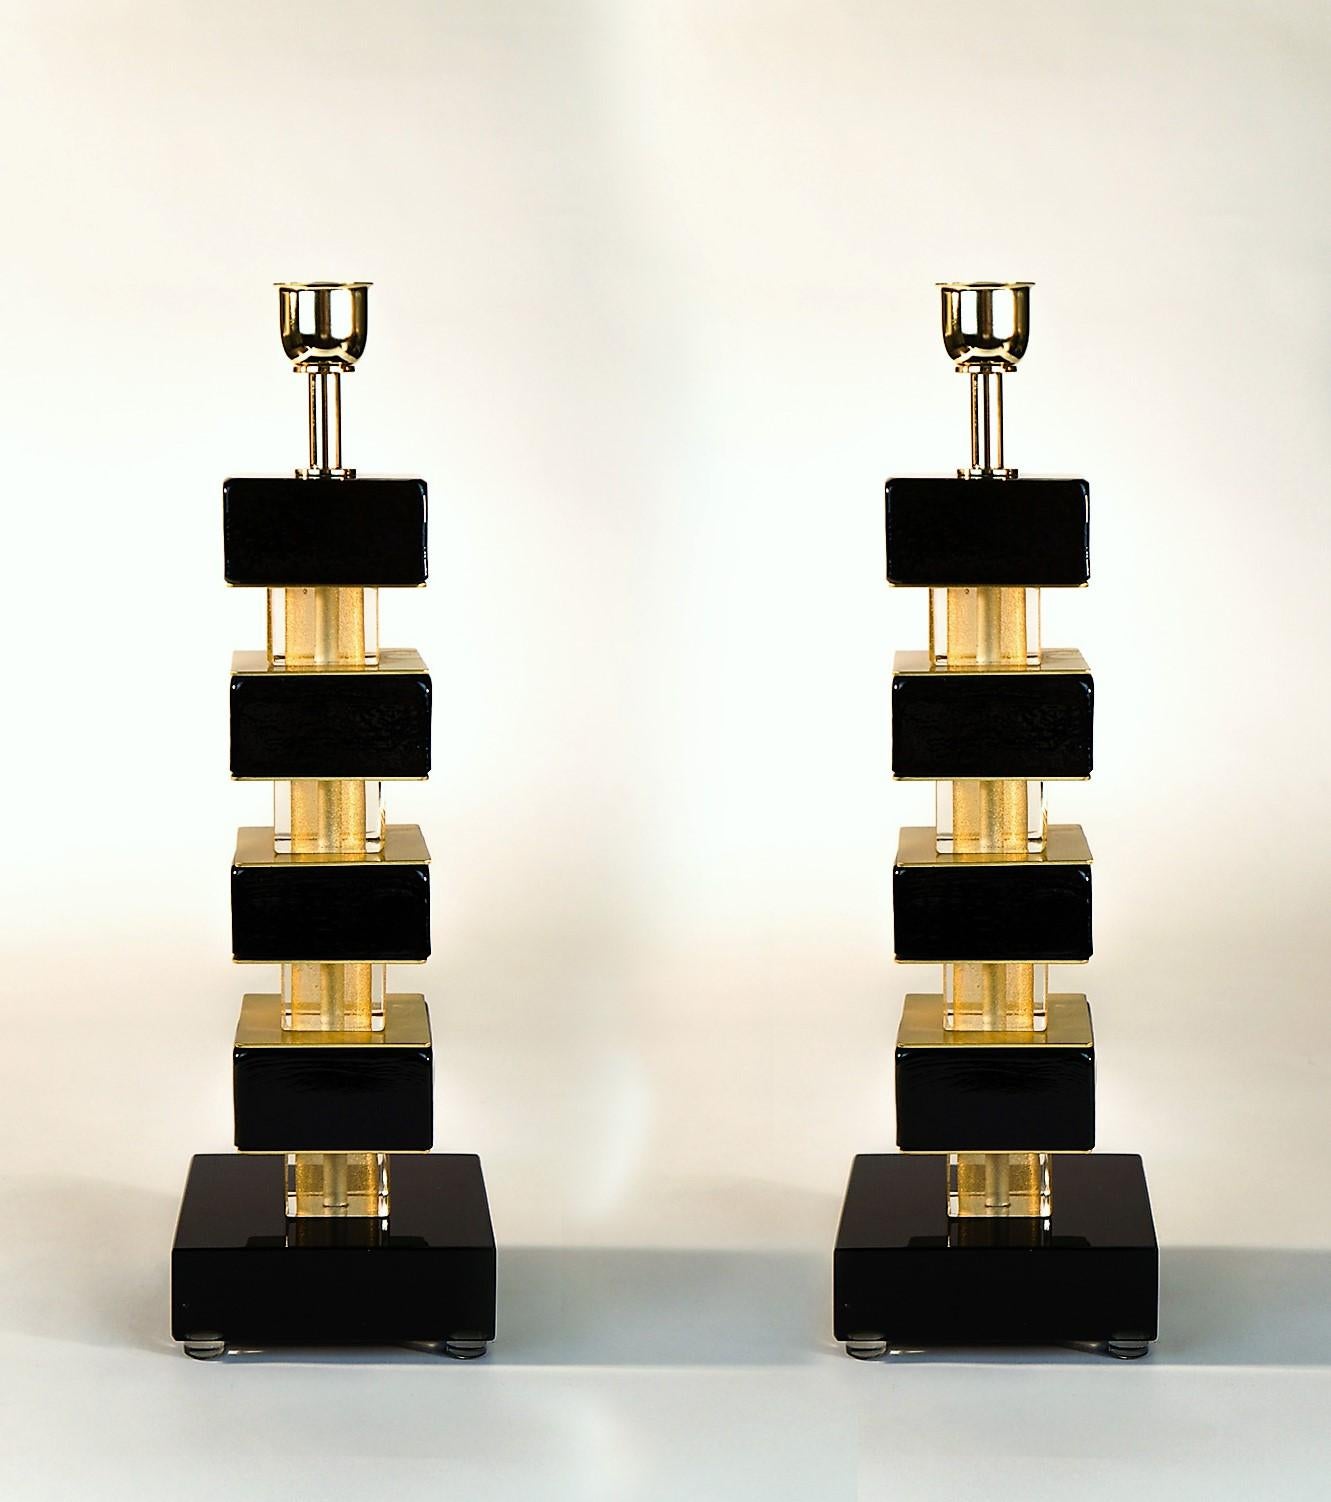 This is a very simple lamp, and because of its simplicity, it is certainly very elegant. Created by maestro Alberto Dona 'in 1980, it is embellished with 24-karat gold inserts that alternate with black blocks making the body of this lamp extremely